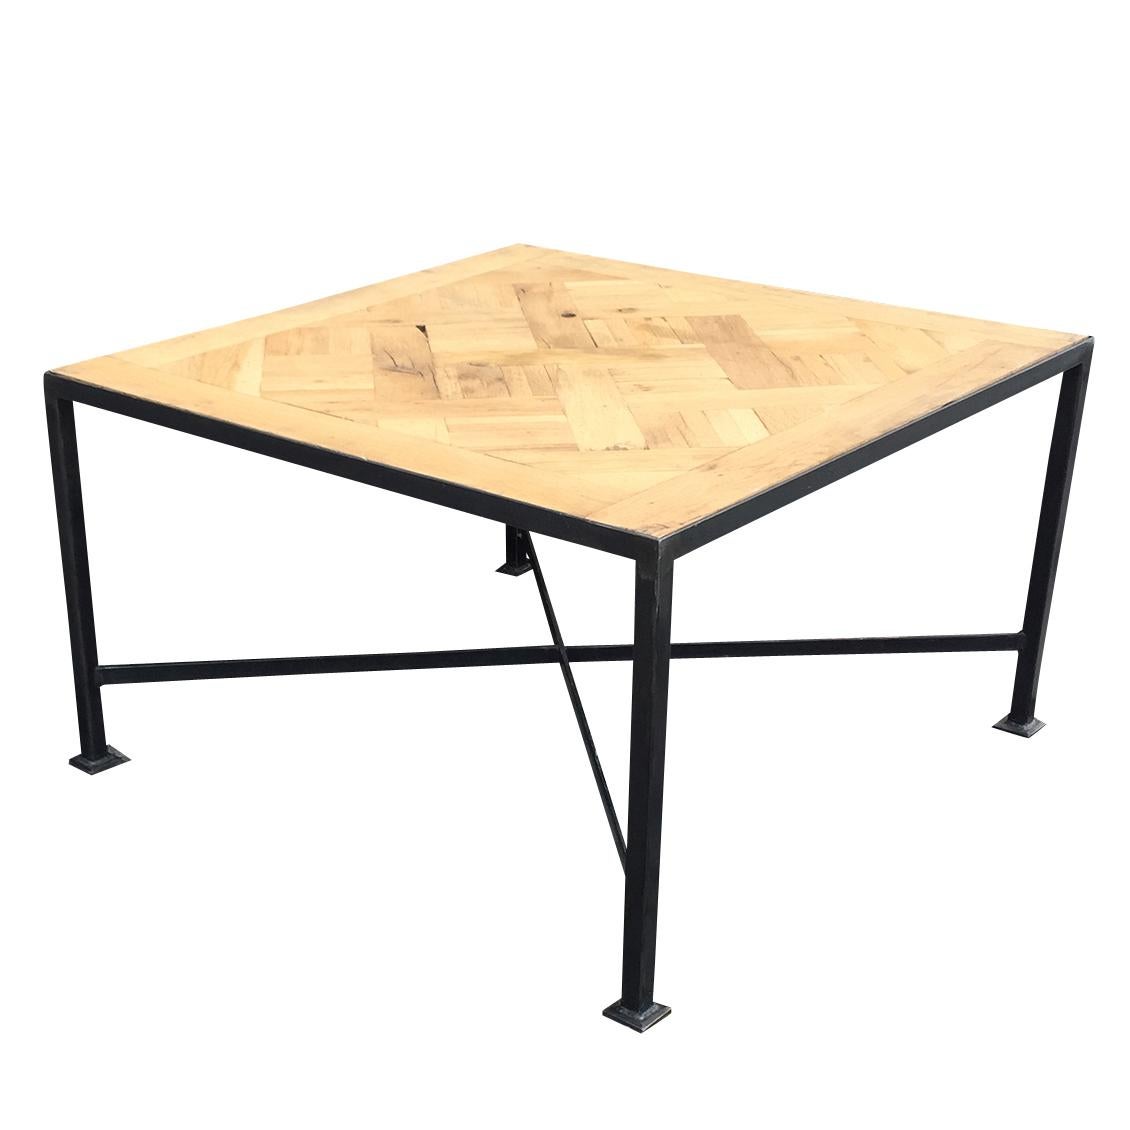 20th Century Parquetry Square Top Coffee Table on Custom Iron Base